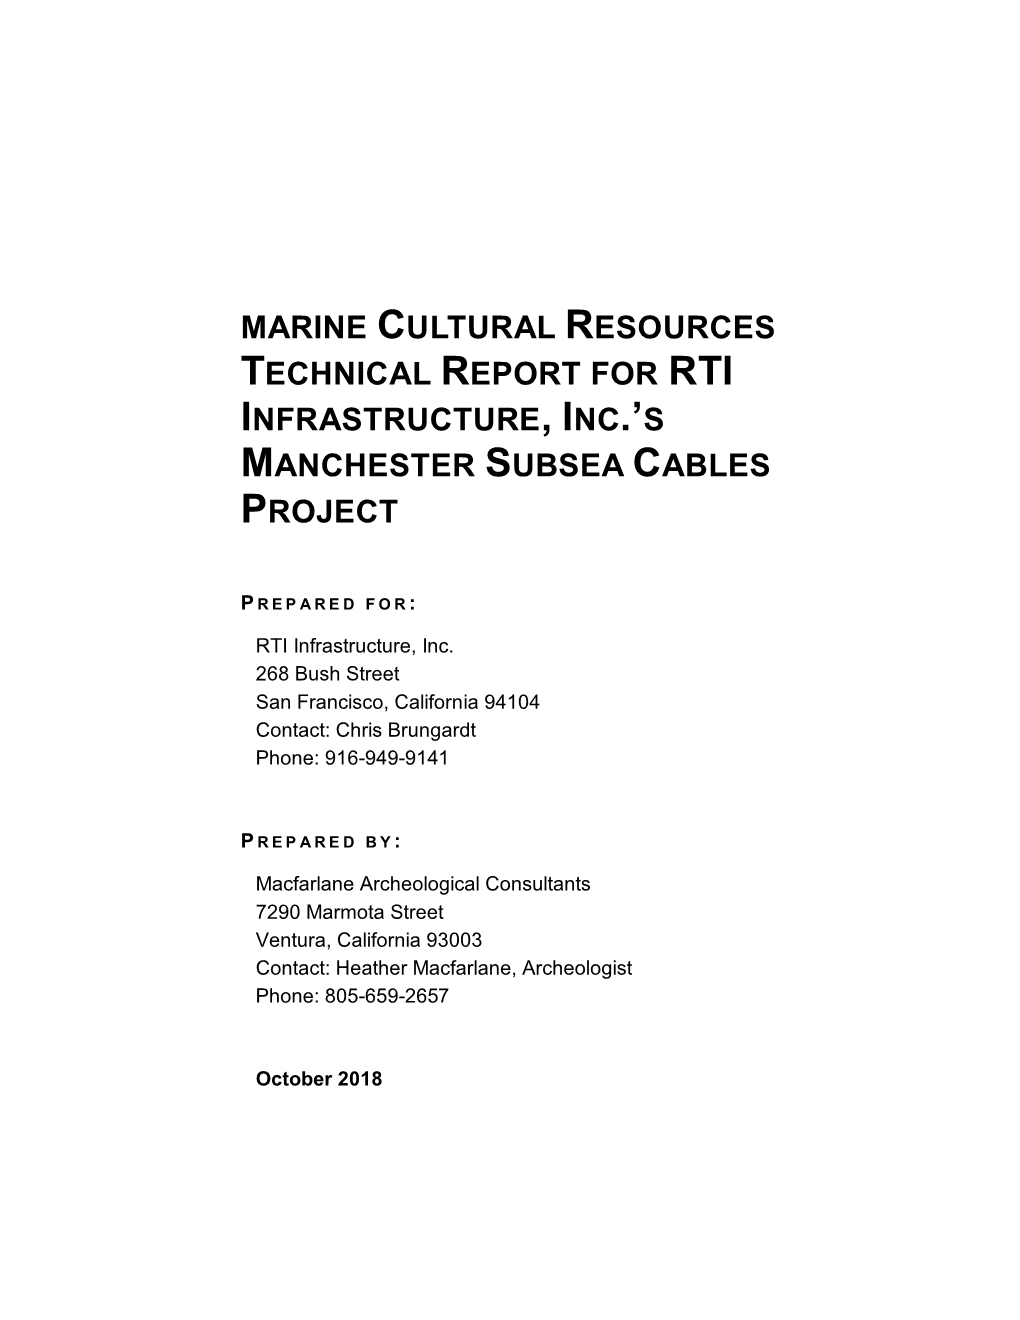 Marine Cultural Resources Technical Report for Rti Infrastructure, Inc.’S Manchester Subsea Cables Project